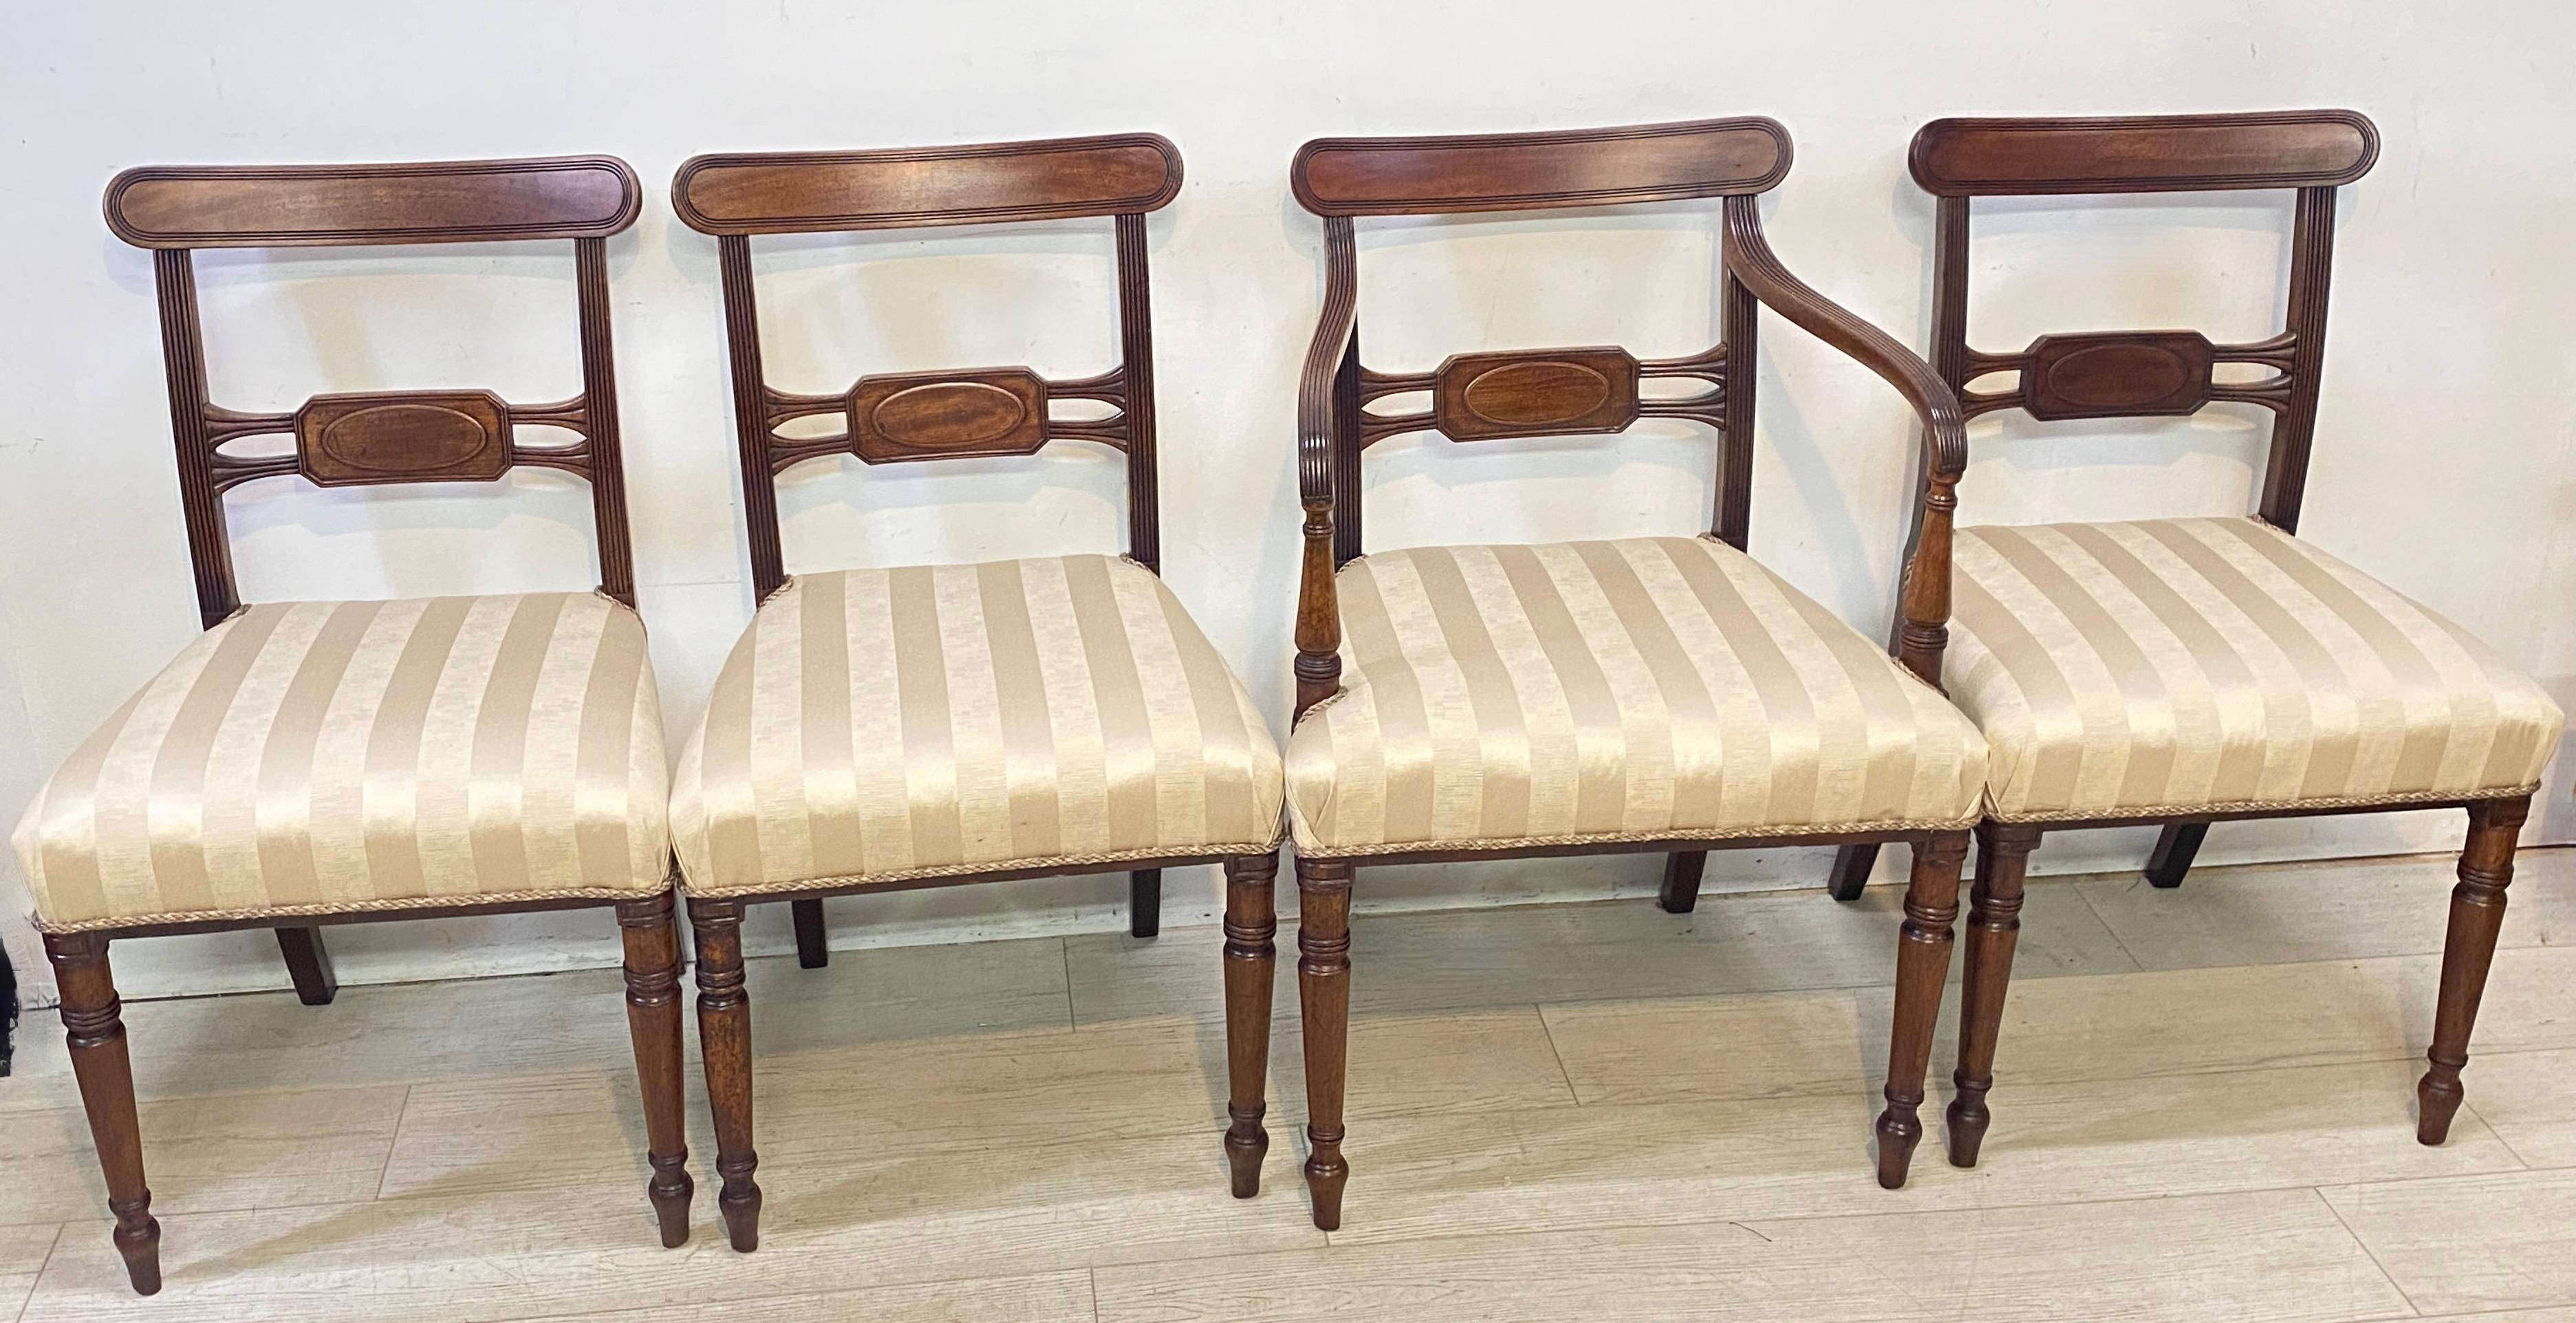 A set of four mahogany Regency style dining chairs, consisting of one armchair and three side chairs with upholstered seats. Recently upholstered.
Quality set of chairs in very good antique condition, comfortable and sound.
England, early 19th